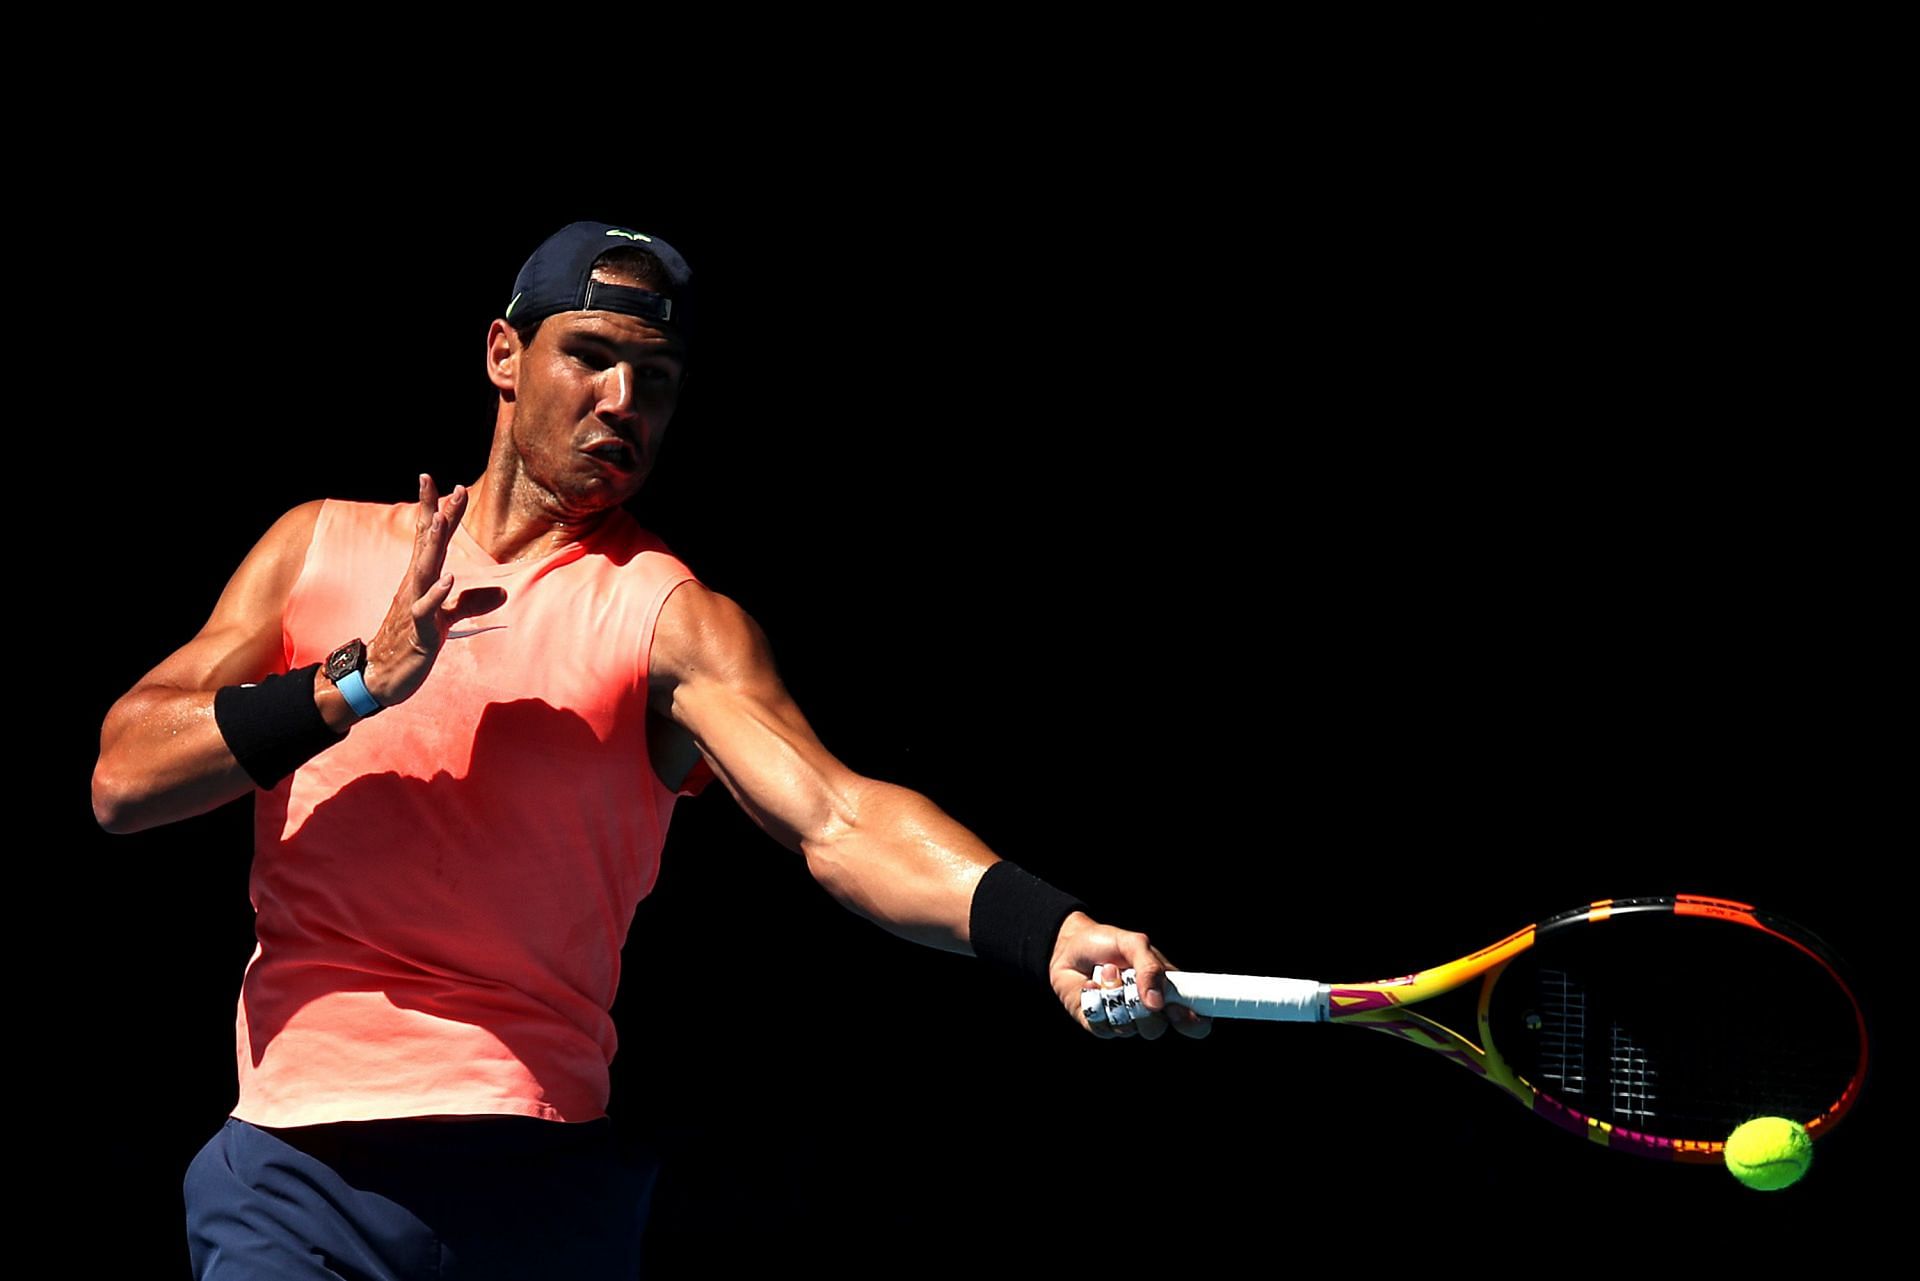 Nadal hits a forehand during his practice session at the Rod Laver Arena